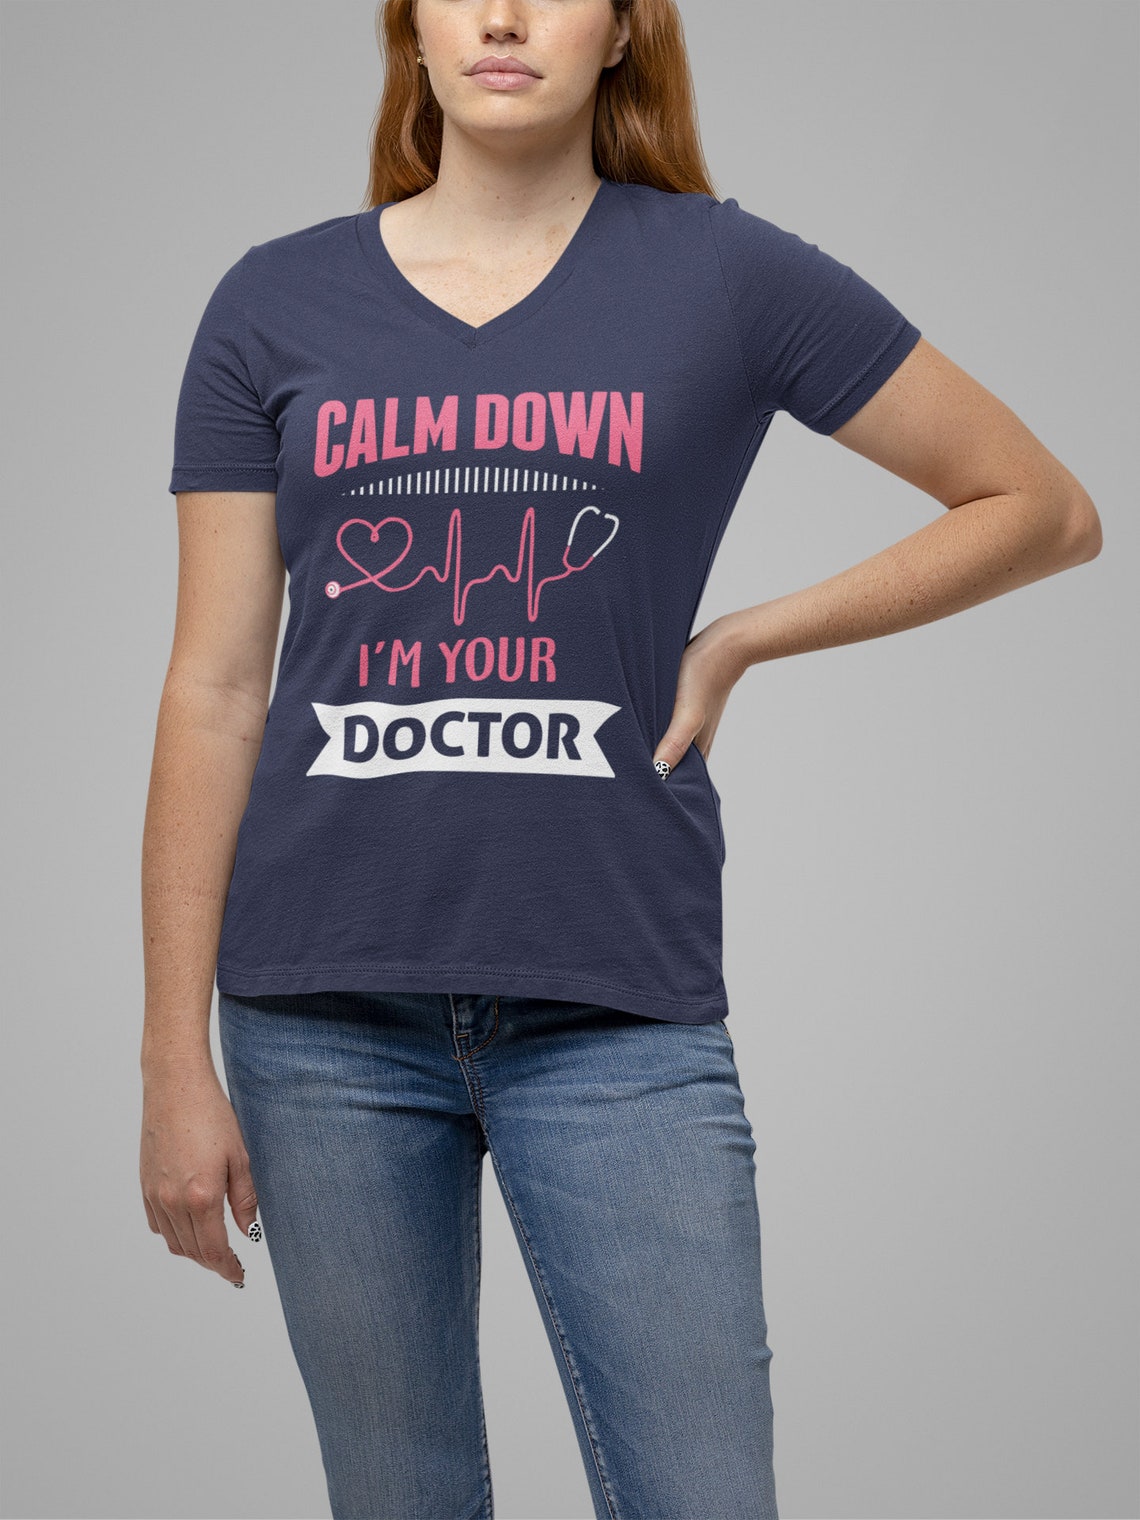 Calm Down I'm Your Doctor Women's Short Sleeve V-Neck Tee, Doctor shirts, Doctor gift ideas, doctors gift, women shirt with doctor design